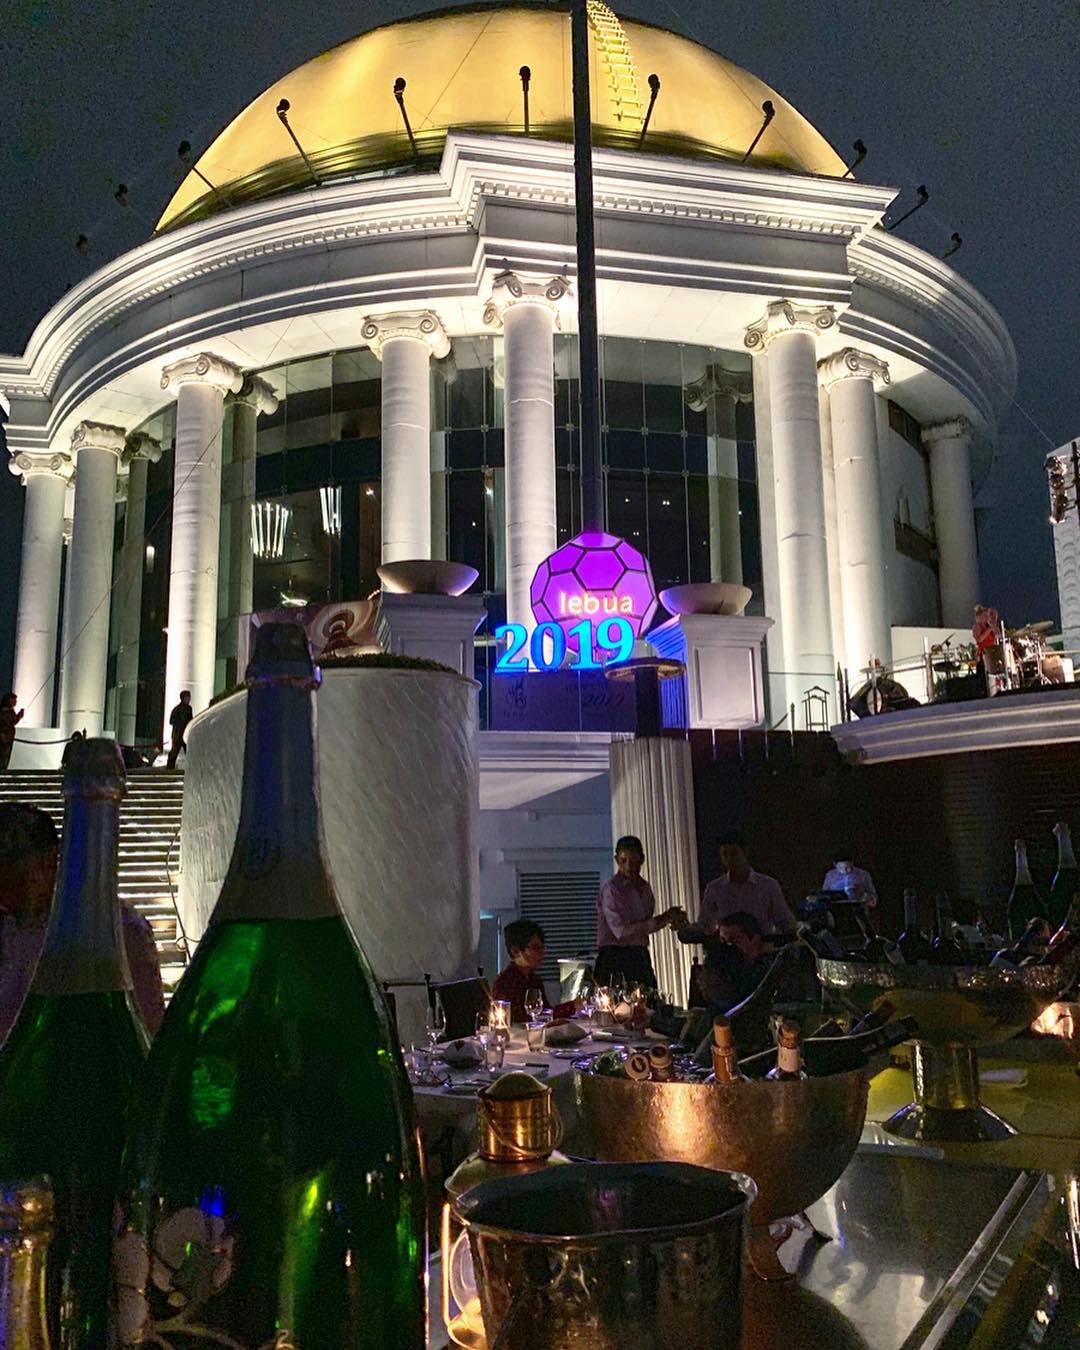 Scirocco Sky Bar, Lebua at State Tower Bangkok #lebua #lebuastatetower #hangover2 #hangovertini #hangoverskybar #bangkok #thailand #skybar #rooftopbar #roofs #rooftop #bar #cheers #2019 #dome #goldendome #champagne #happynewyear